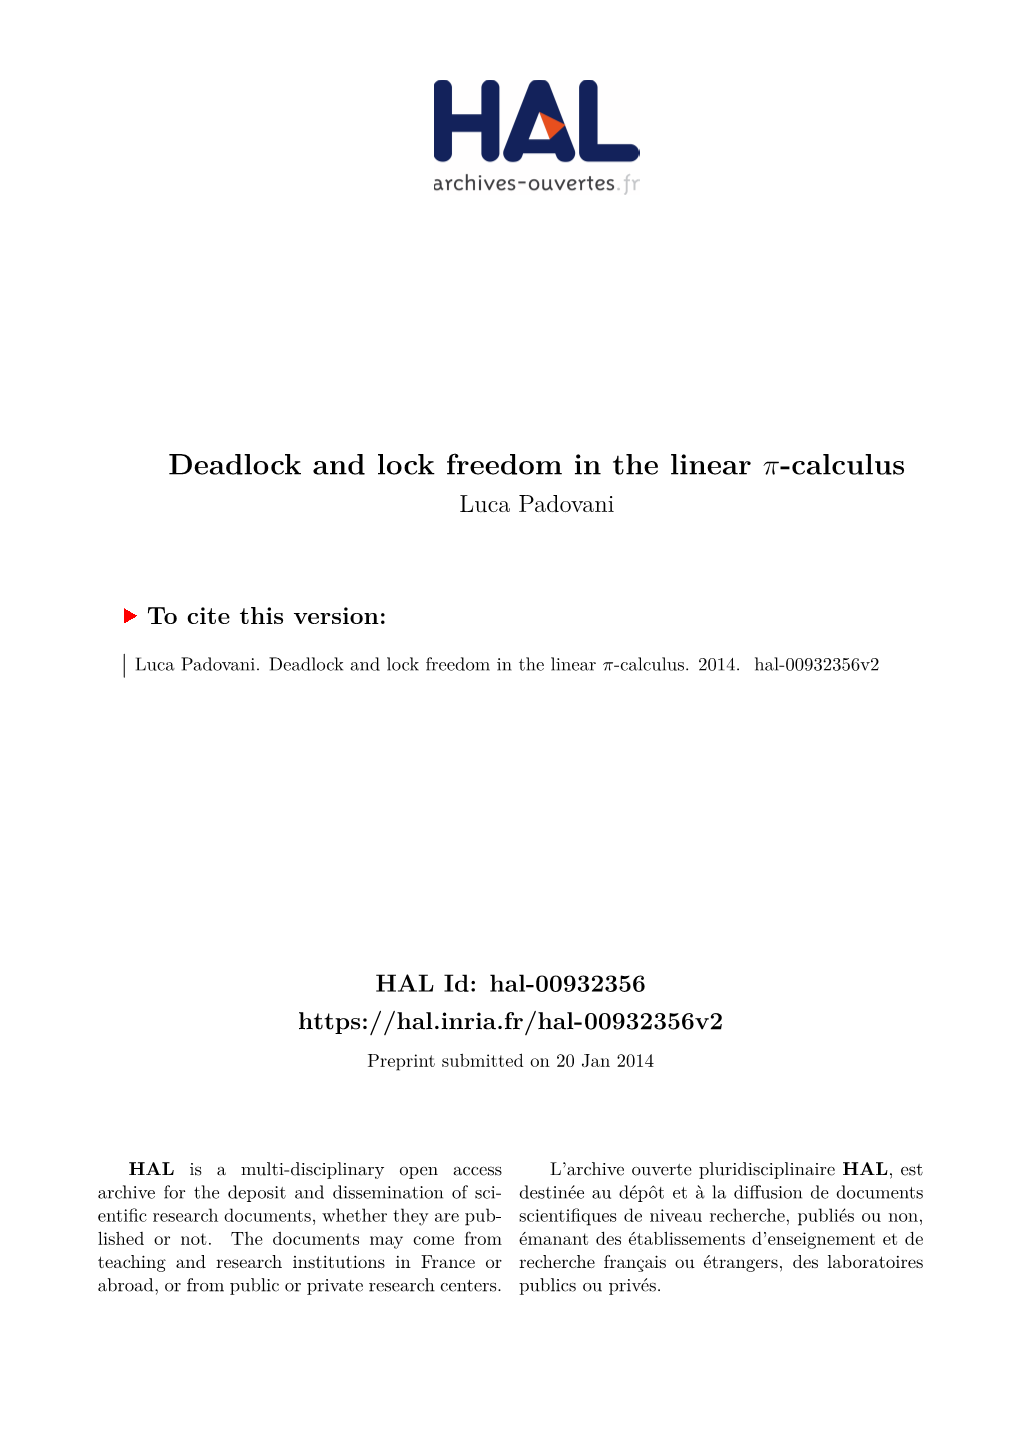 Deadlock and Lock Freedom in the Linear -Calculus